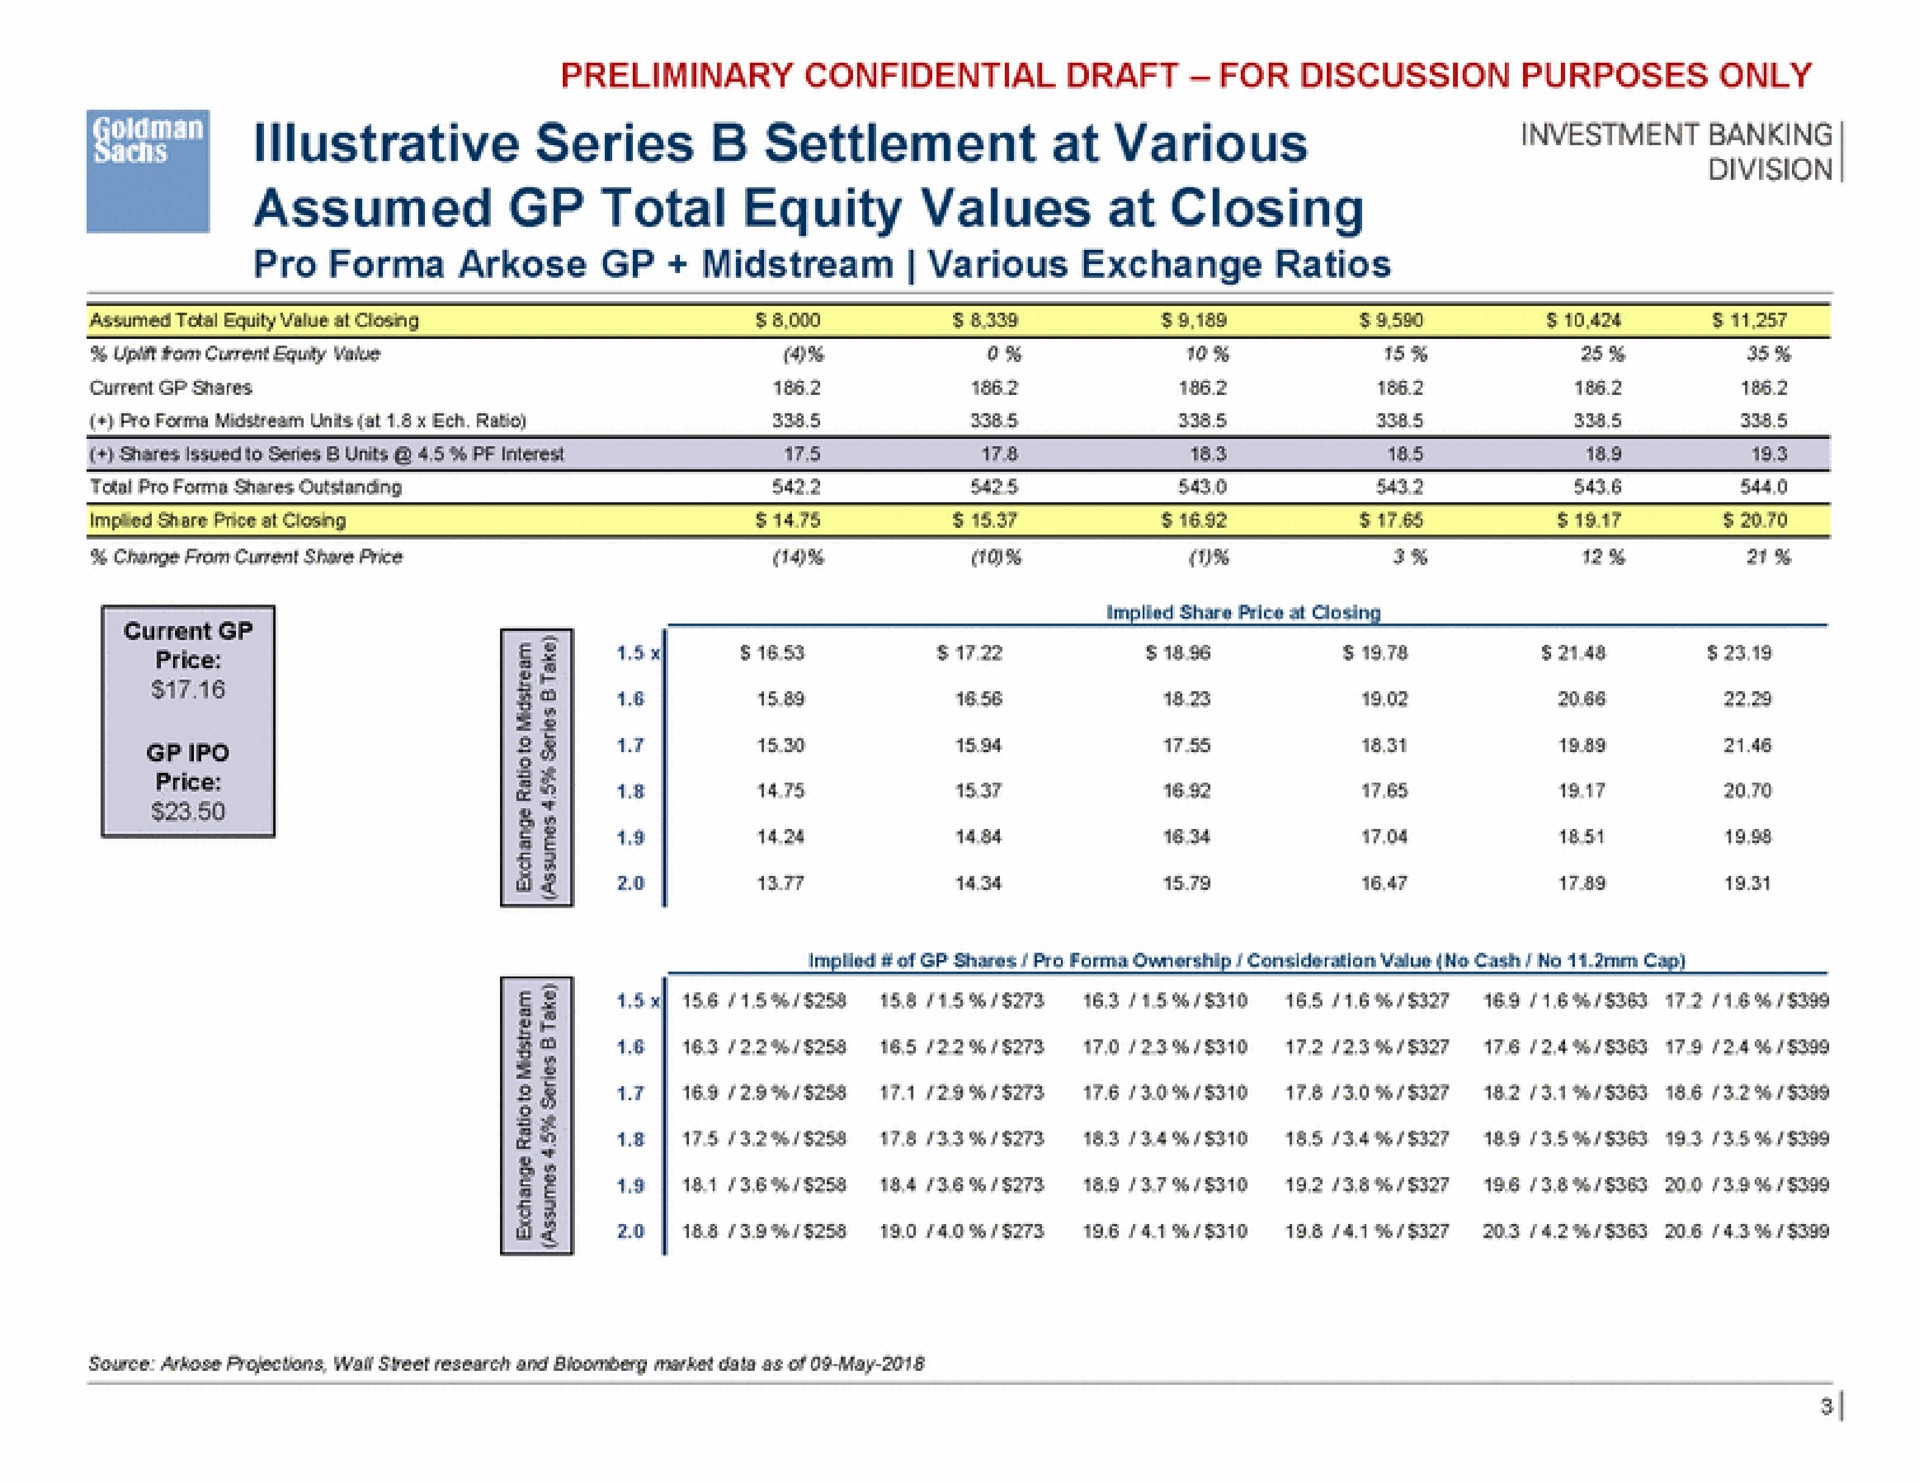 investment banking illustrative series settlement at various assumed total equity values at closing | Goldman Sachs